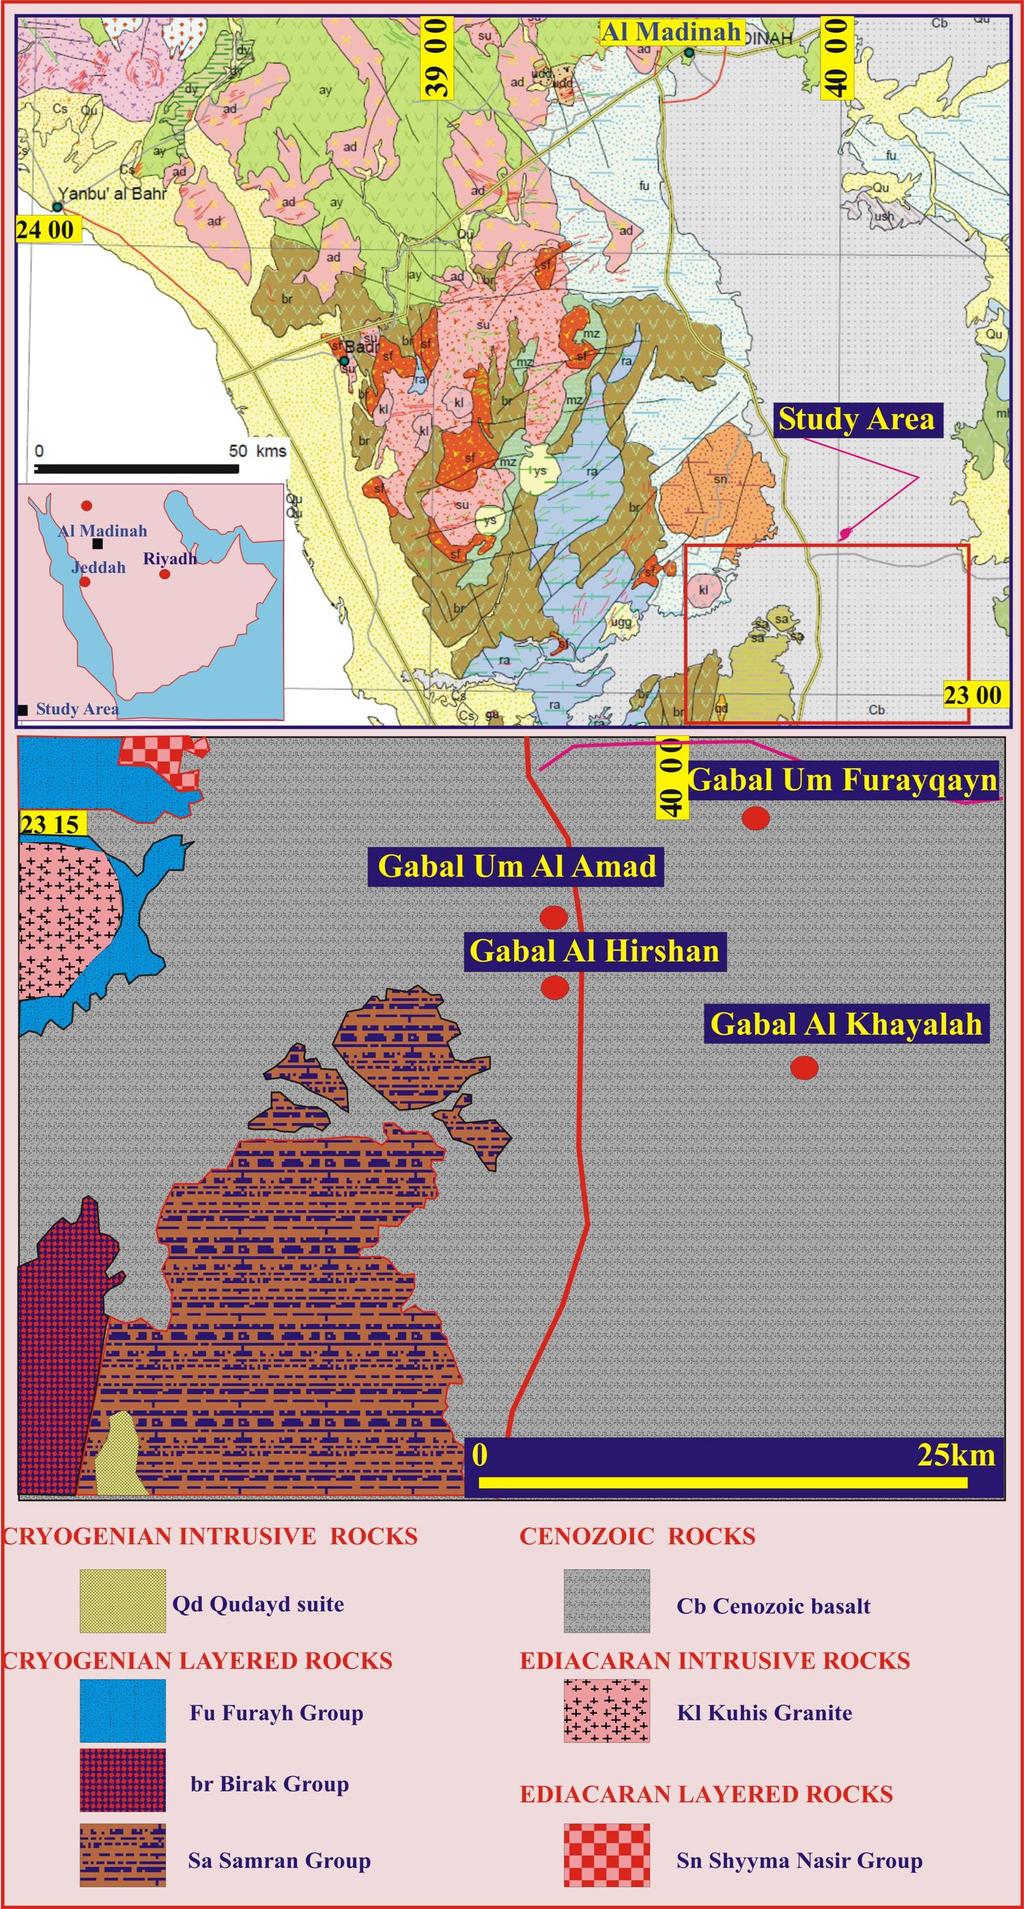 Fig. (1): Geologic map of the study area